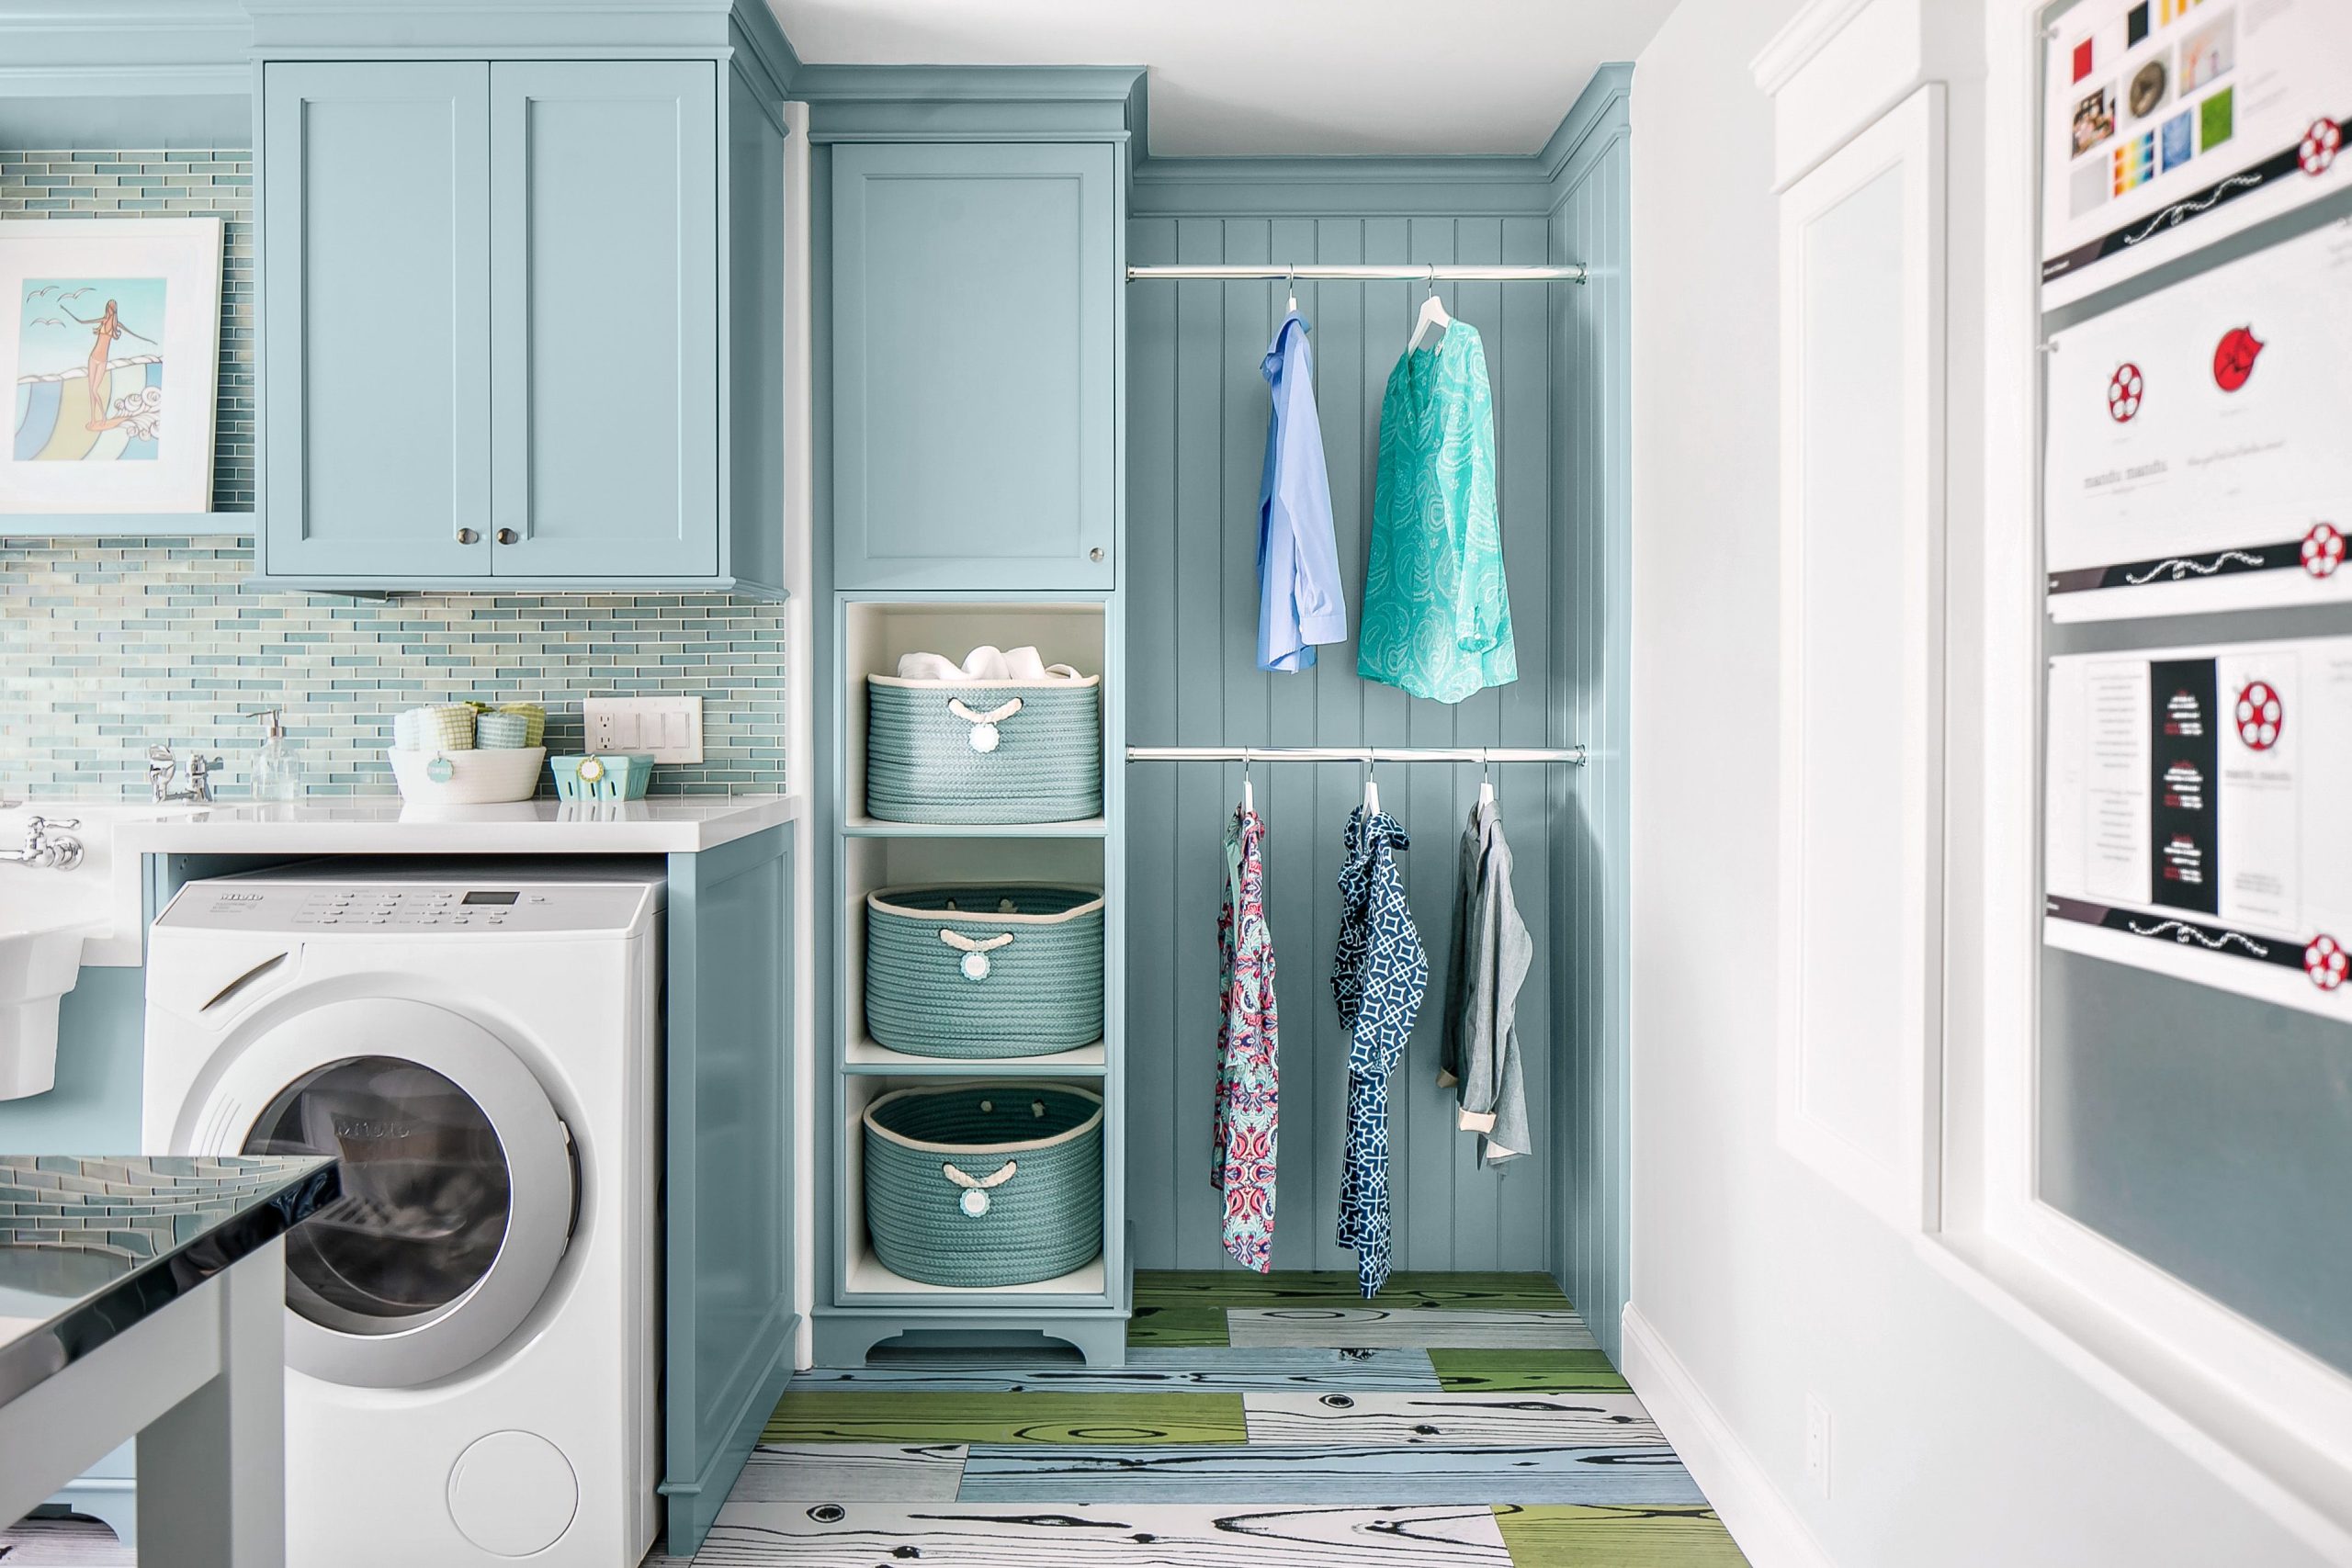 Where to hang hangers in a laundry room?